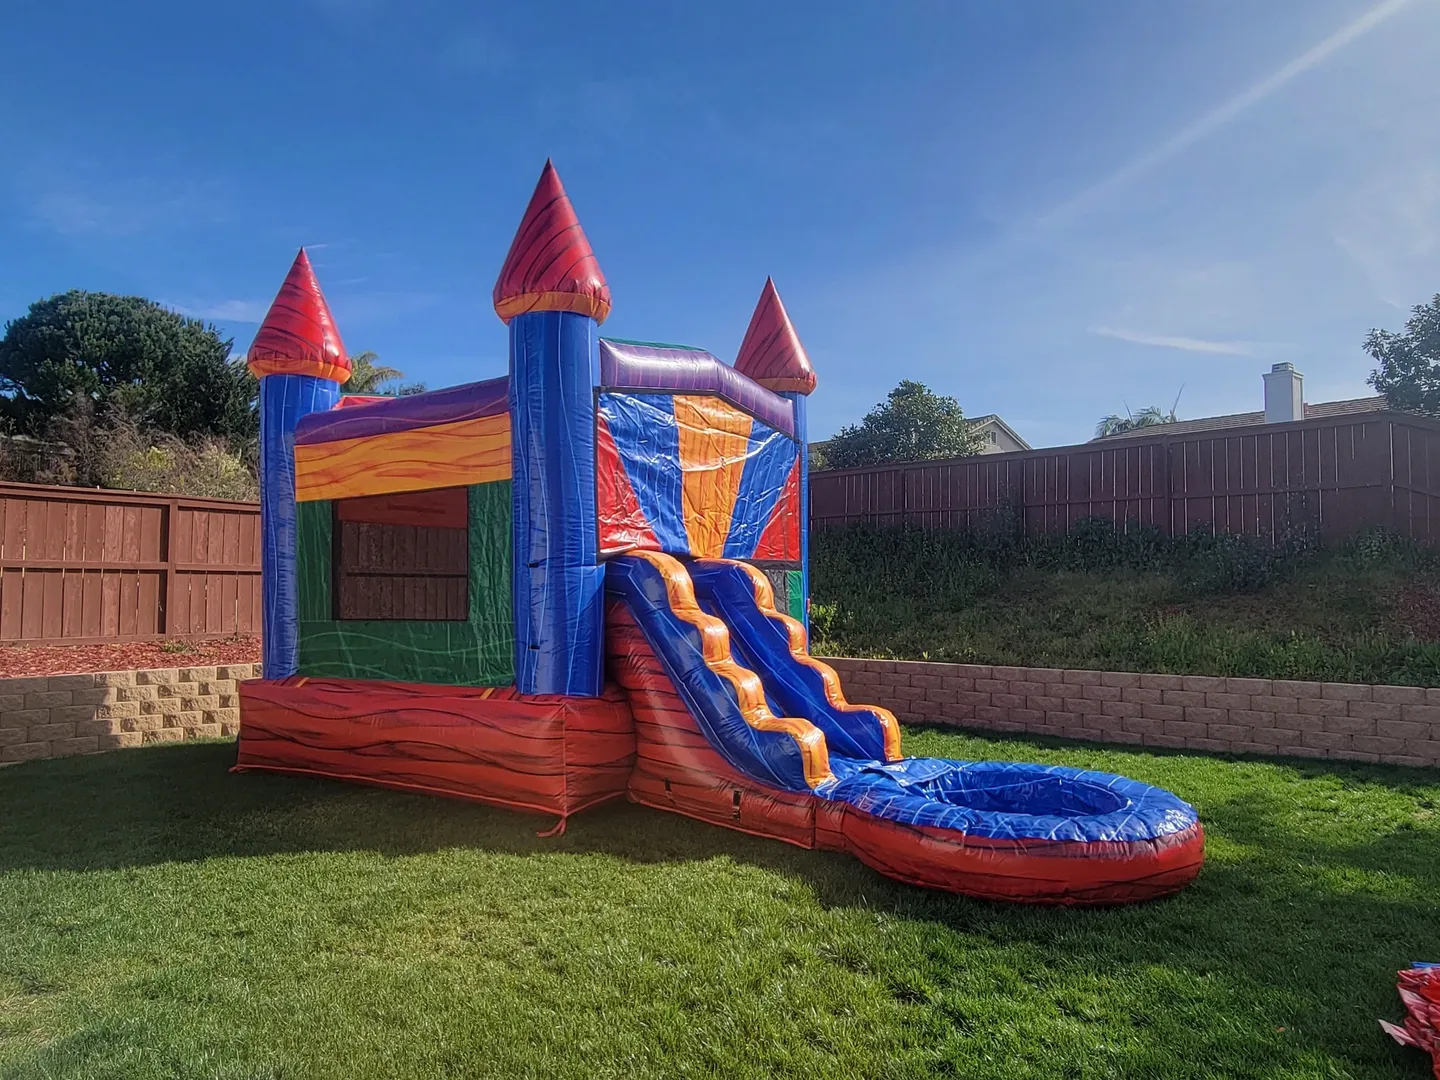 A bouncy castle with water slide in the middle of a yard.